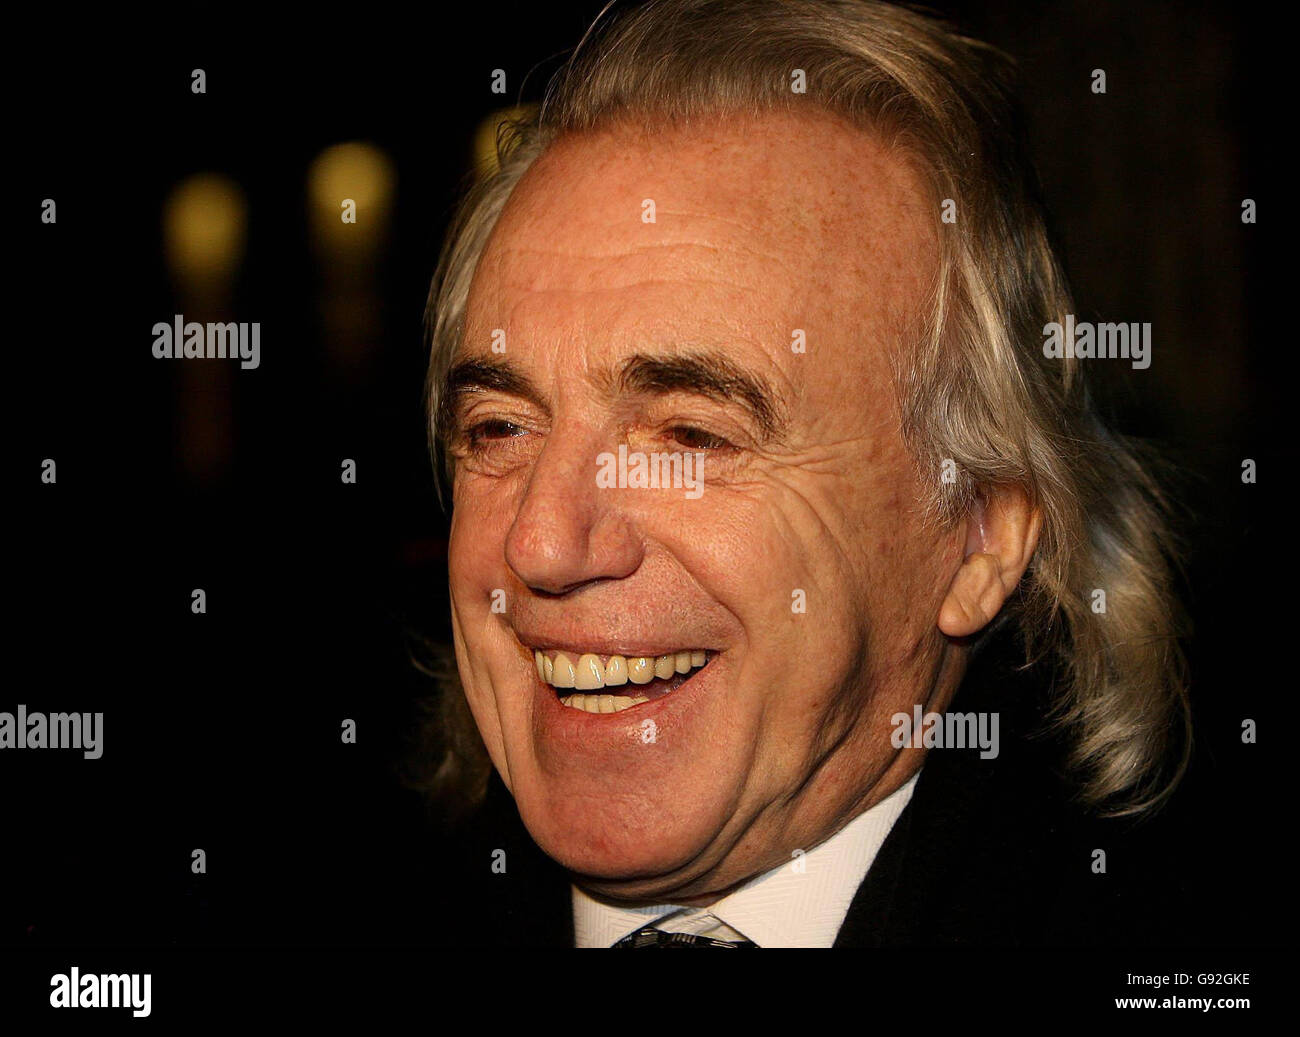 Nightclub owner Peter Stringfellow celebrates after he was granted licence for his proposed club to be based in central Dublin, Monday January 9 2006, despite fierce local opposition. The Stringfellow's club will be the largest of its kind in Dublin and will have up to 100 dancers working on two floors. At the Richmond District Court in Dublin, Judge Anne Watkins said she sympathised with local residents who felt offended by the opening of such a club in their area. See PA COURTS Stringfellow. PRESS ASSOCIATION Photo. Photo credit should read: Niall Carson/PA Stock Photo